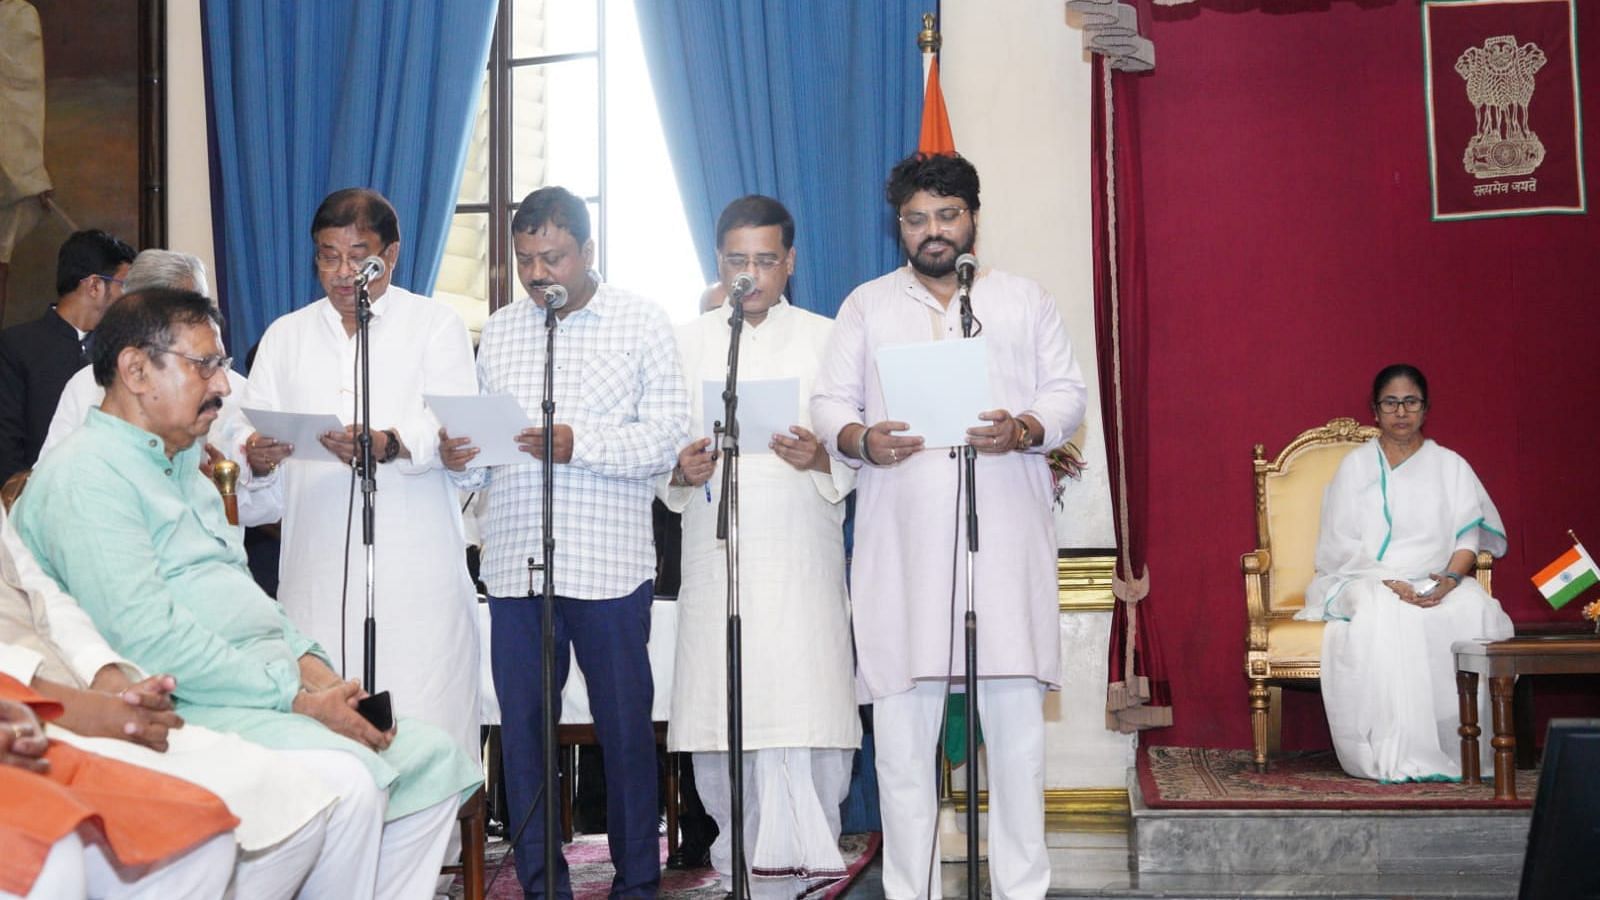 <div class="paragraphs"><p>Nine new ministers, including former Bharatiya Janata Party (BJP) MP <a href="https://www.thequint.com/topic/babul-supriyo">Babul Supriyo</a>, have been sworn-in amid the expansion of the<a href="https://www.thequint.com/topic/mamata-banerjee"> Mamata Banerjee</a>-led West Bengal Cabinet on Wednesday, 3 August.</p></div>